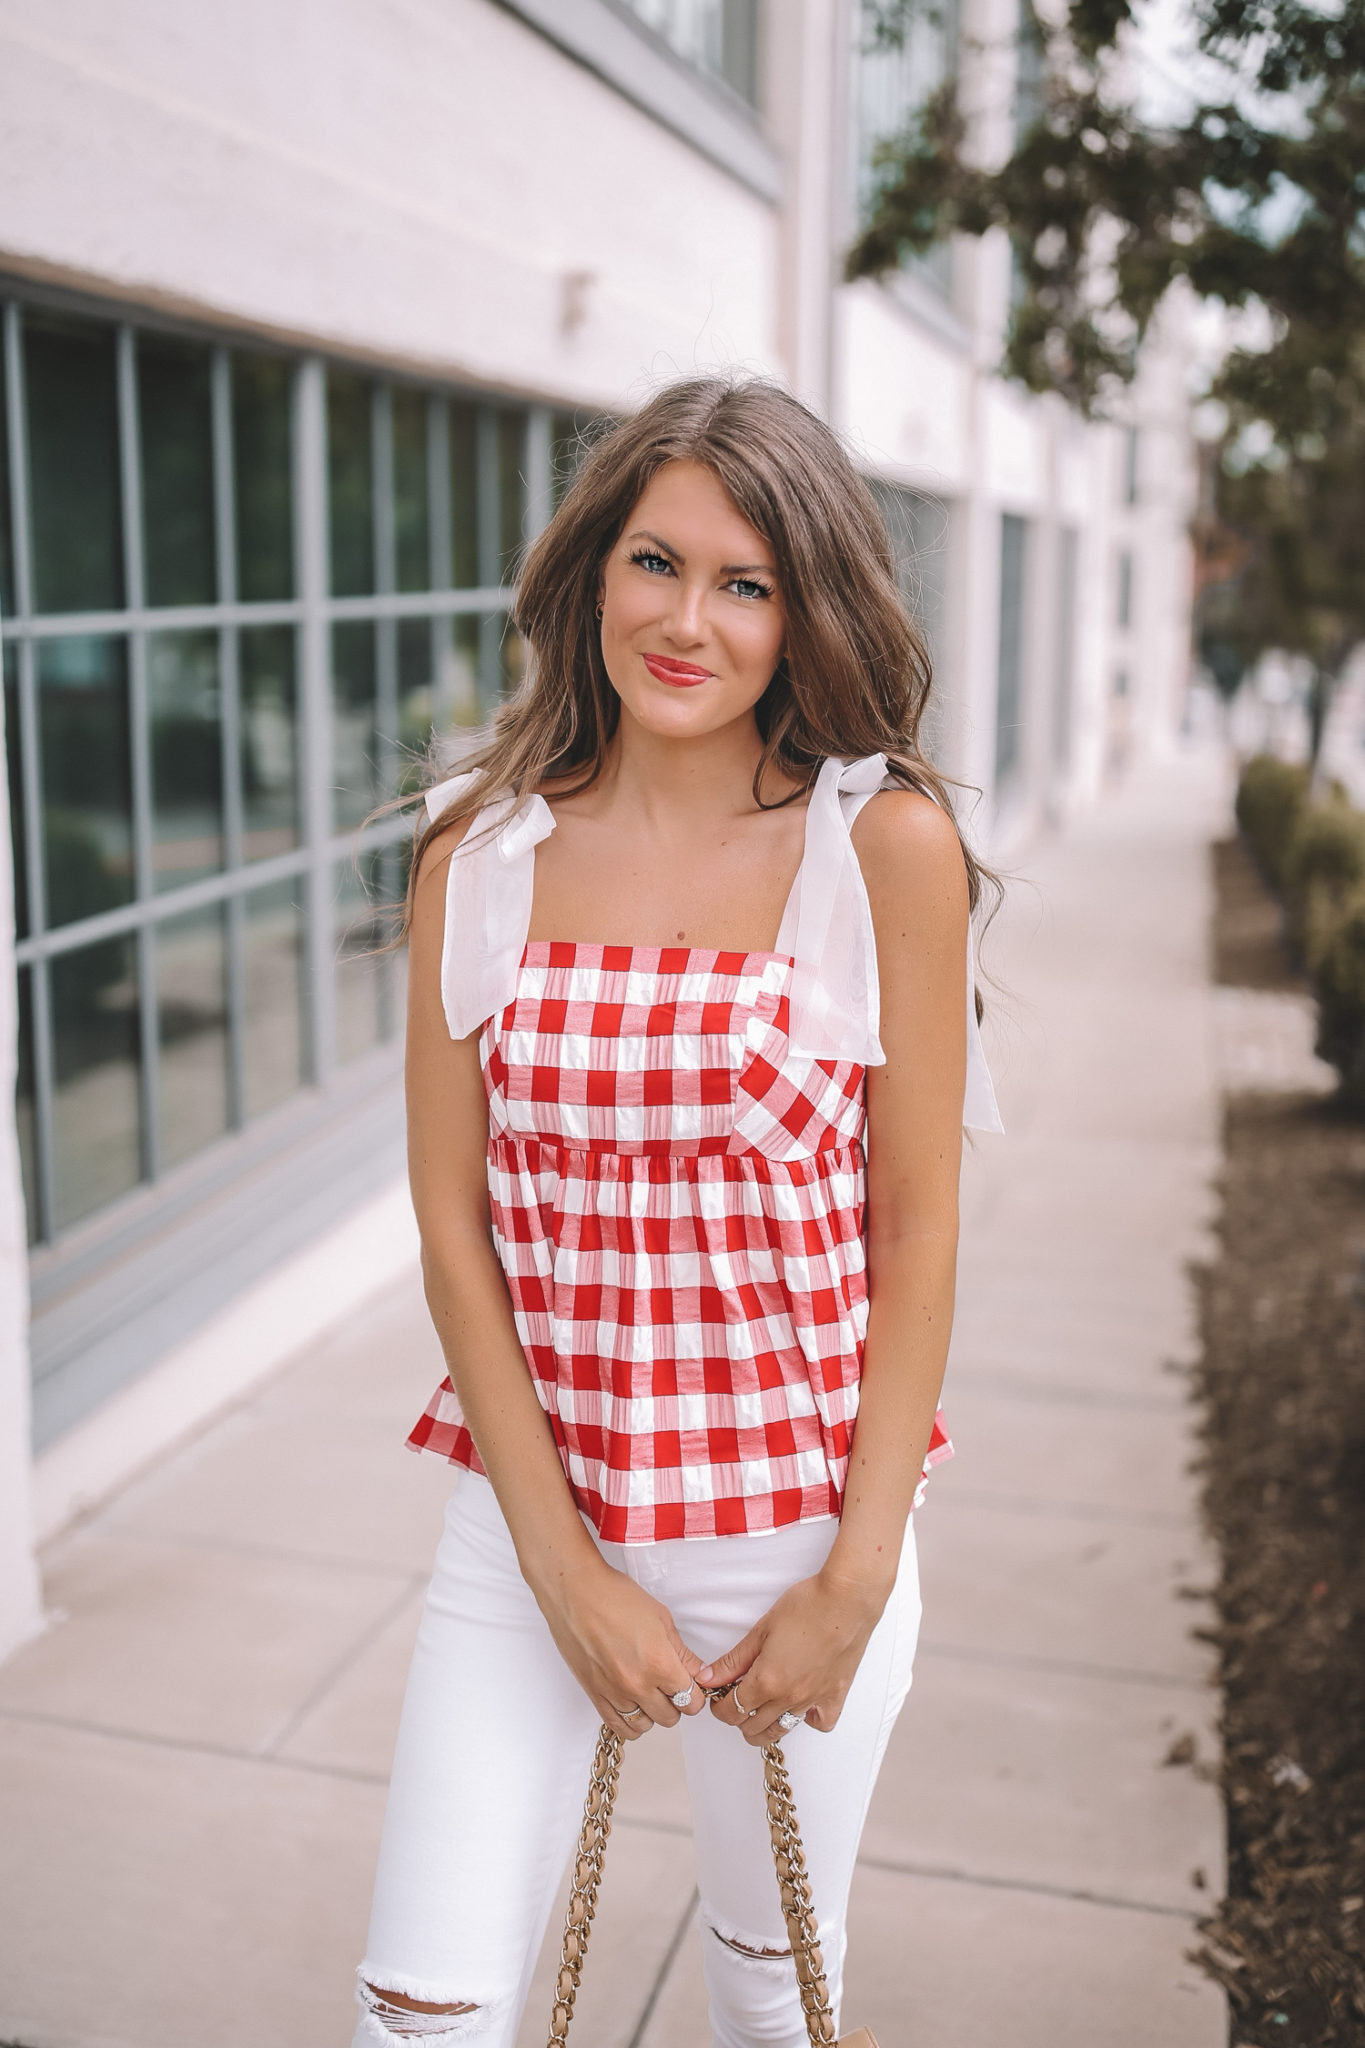 Perfect July 4th Outfit - Southern Curls & Pearls